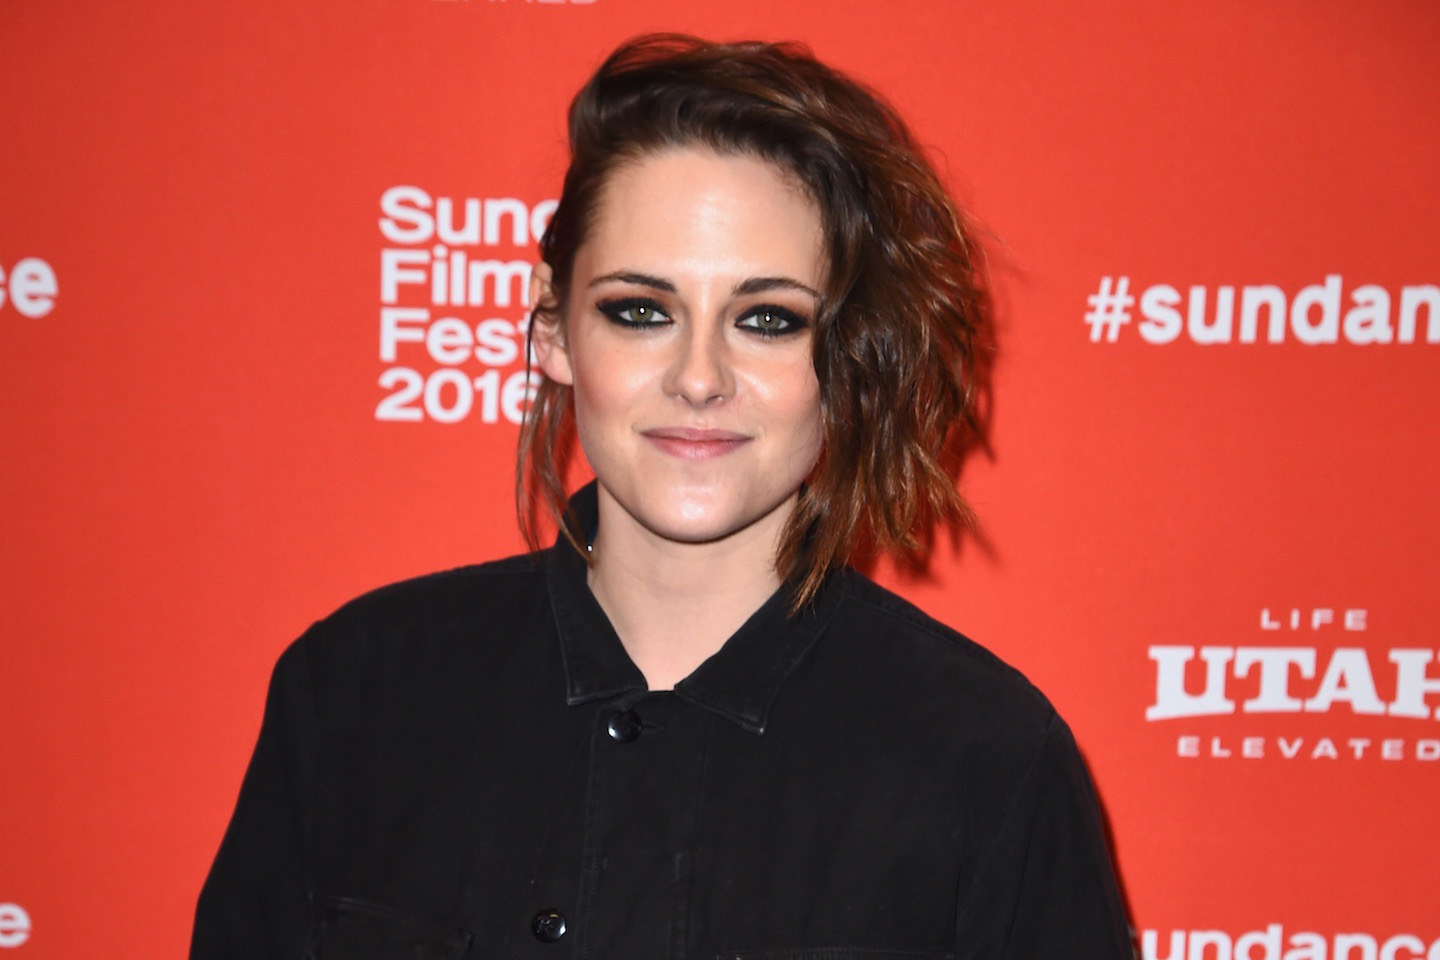 PARK CITY, UT - JANUARY 24: Kristen Stewart attends the "Certain Women" Premiere during the 2016 Sundance Film Festival at Eccles Center Theatre on January 24, 2016 in Park City, Utah. (Photo by Nicholas Hunt/Getty Images for Sundance Film Festival)